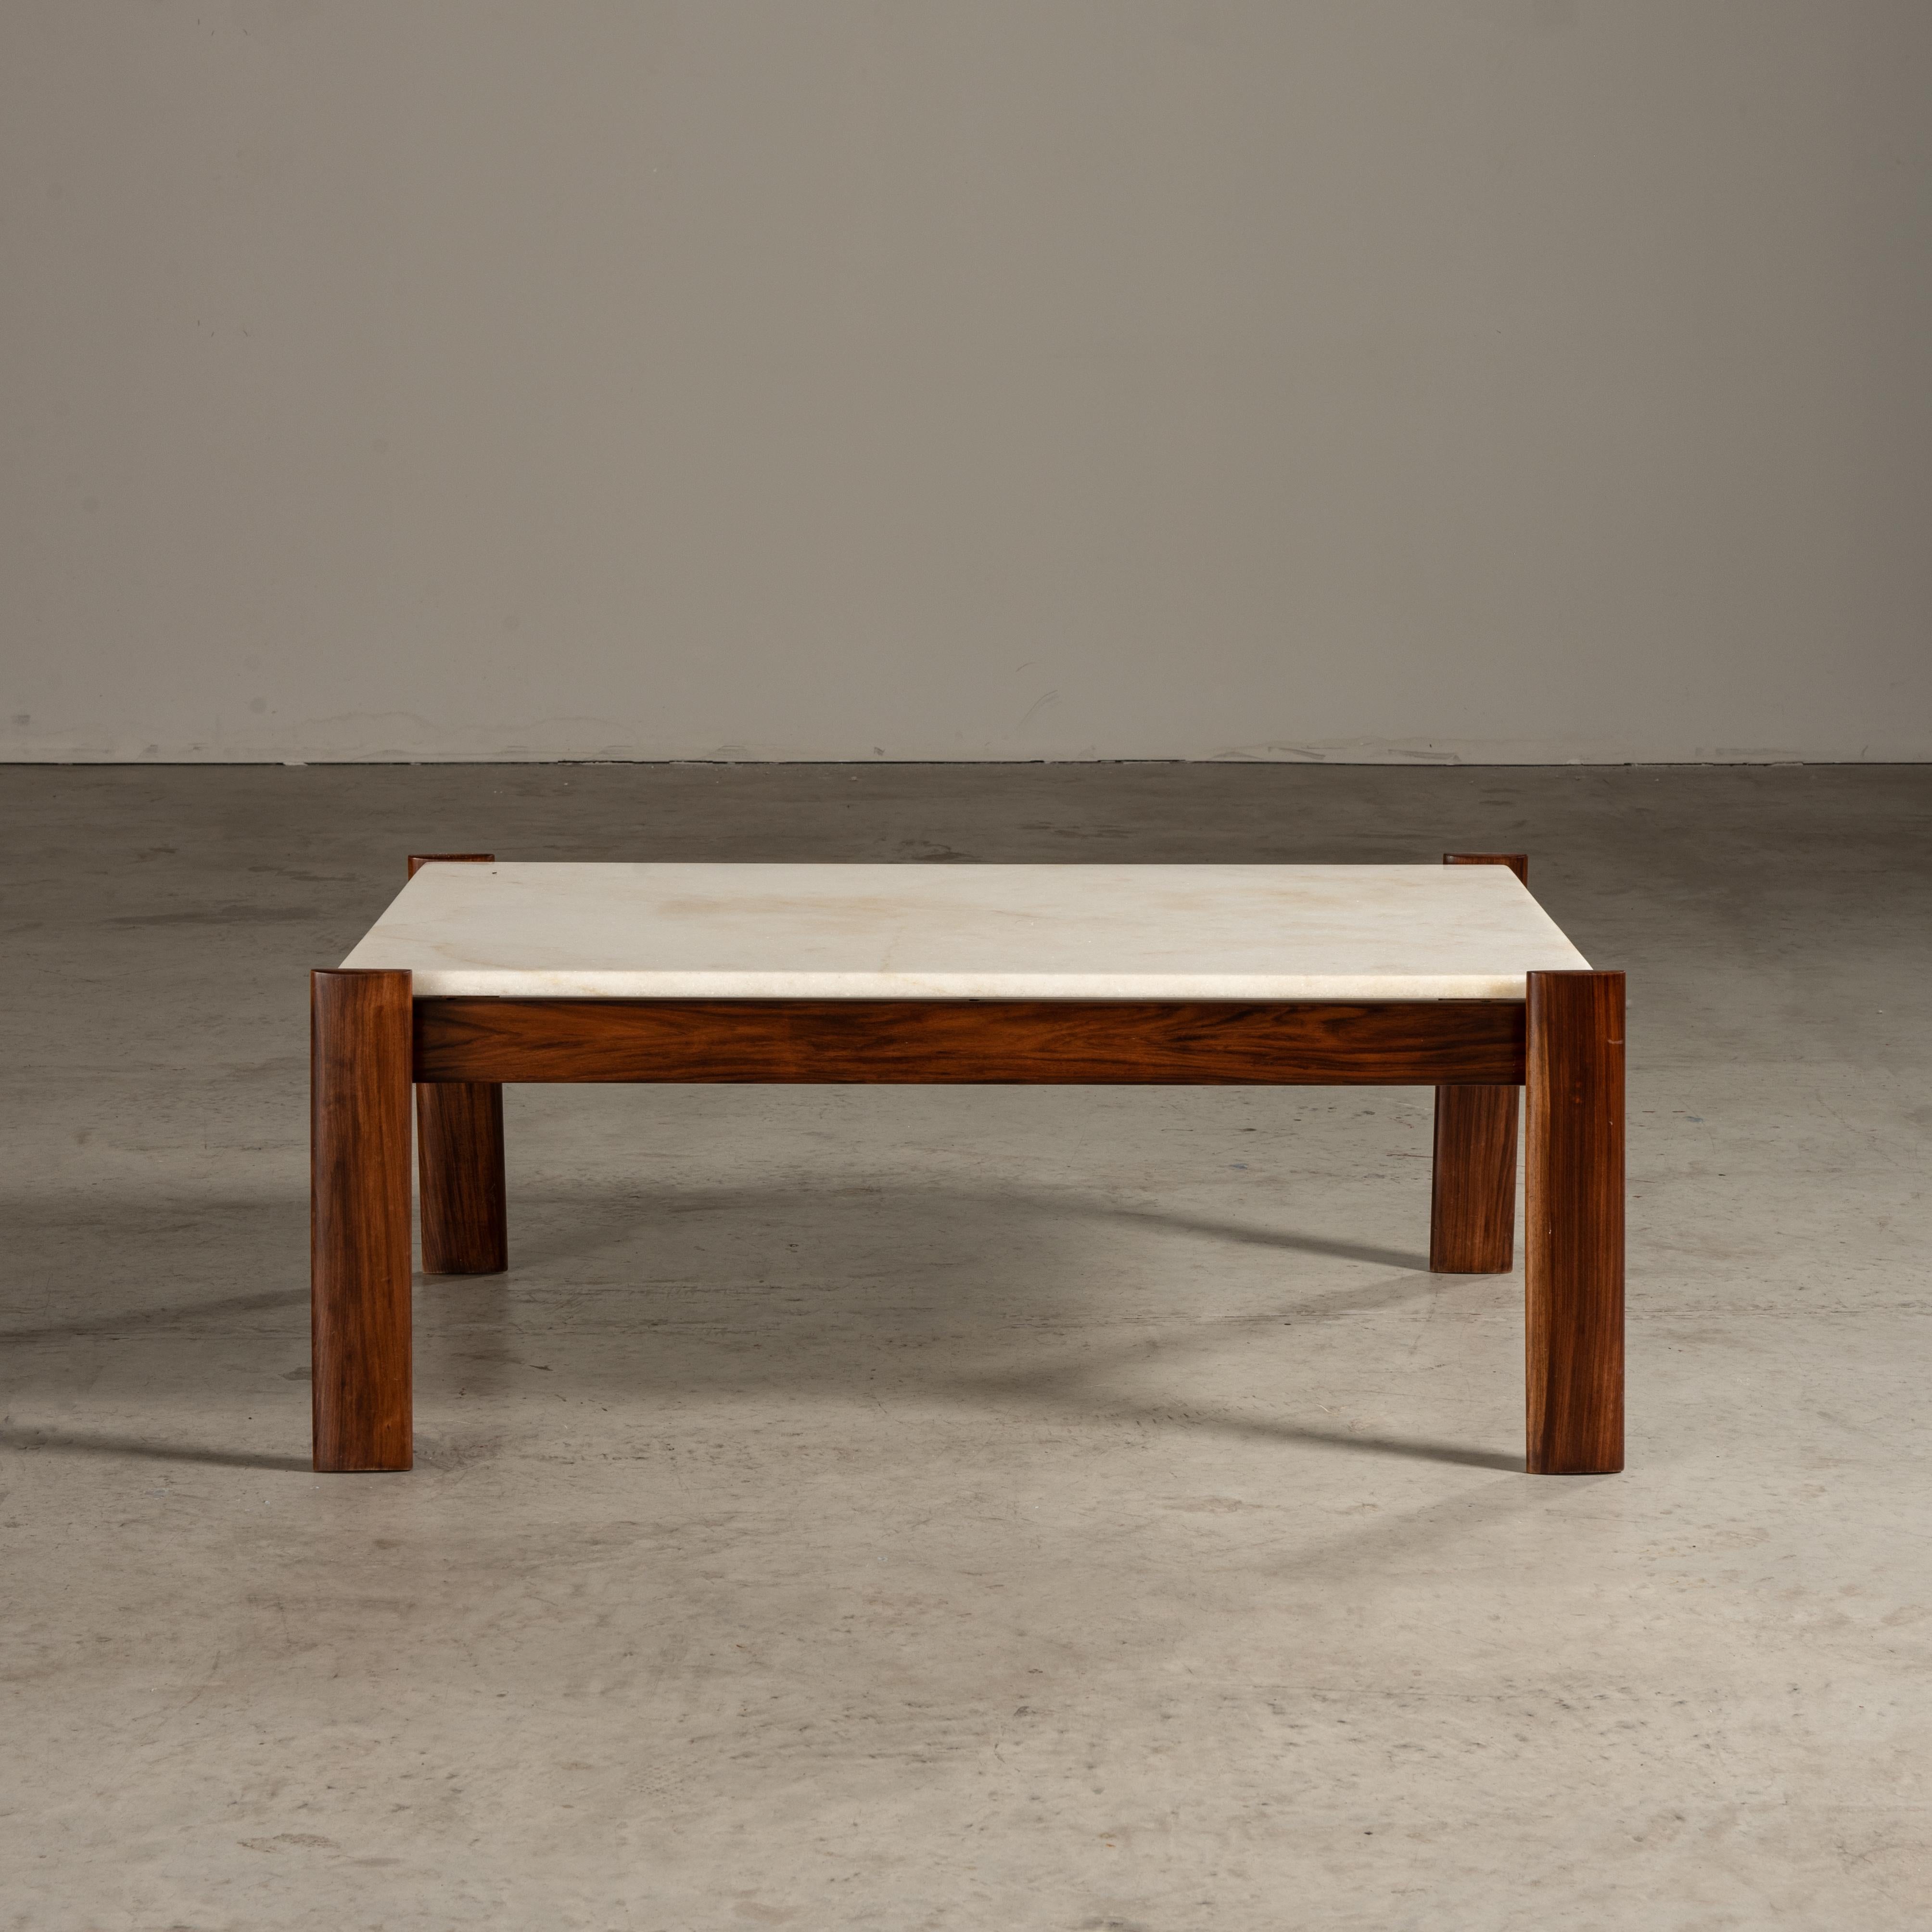 20th Century 'MP- 51' Coffee Table in Marble, by Percival Lafer, Brazilian Mid-Century Modern For Sale